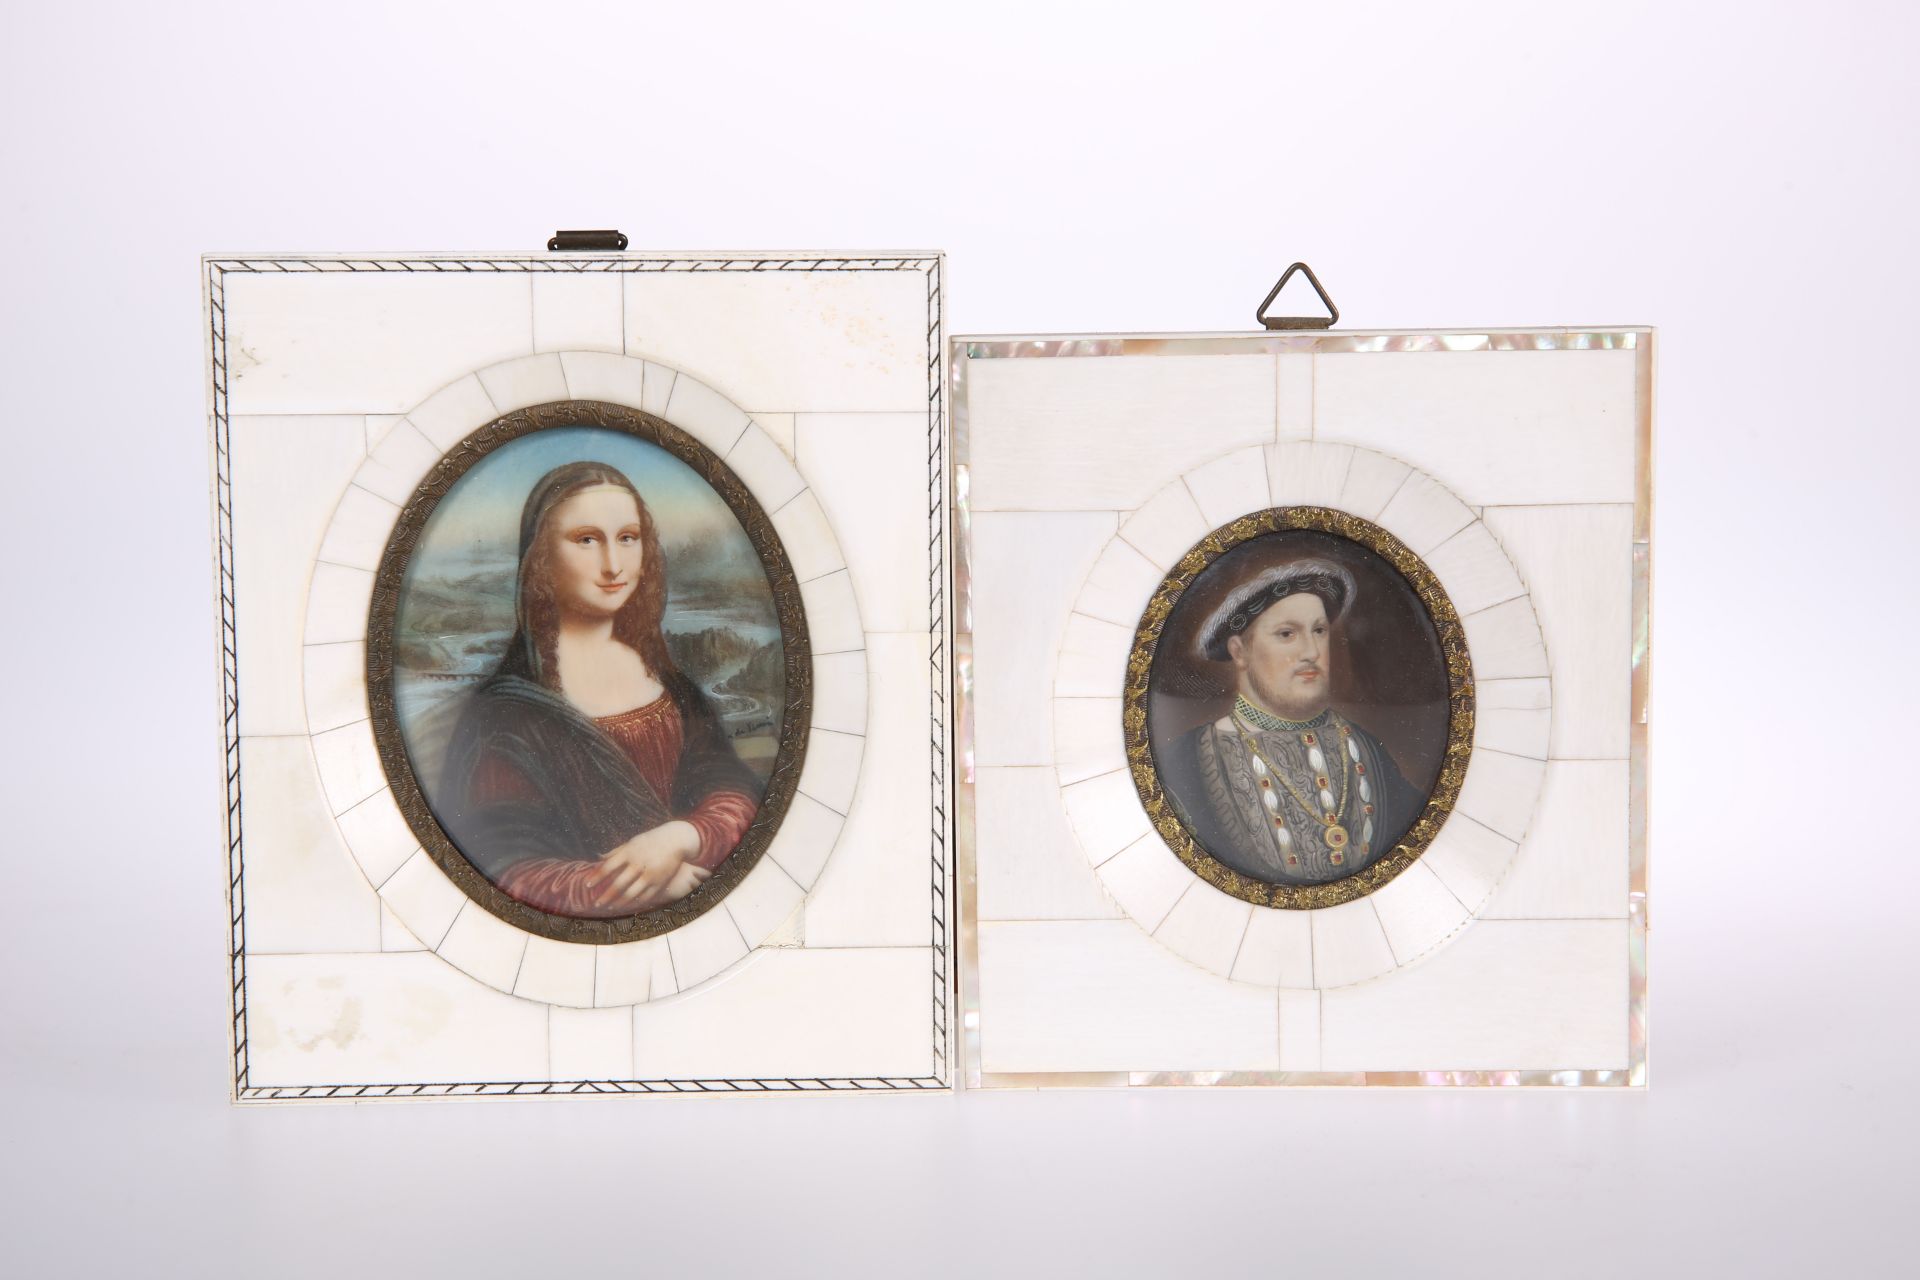 TWO EARLY 20TH CENTURY PORTRAIT MINIATURES